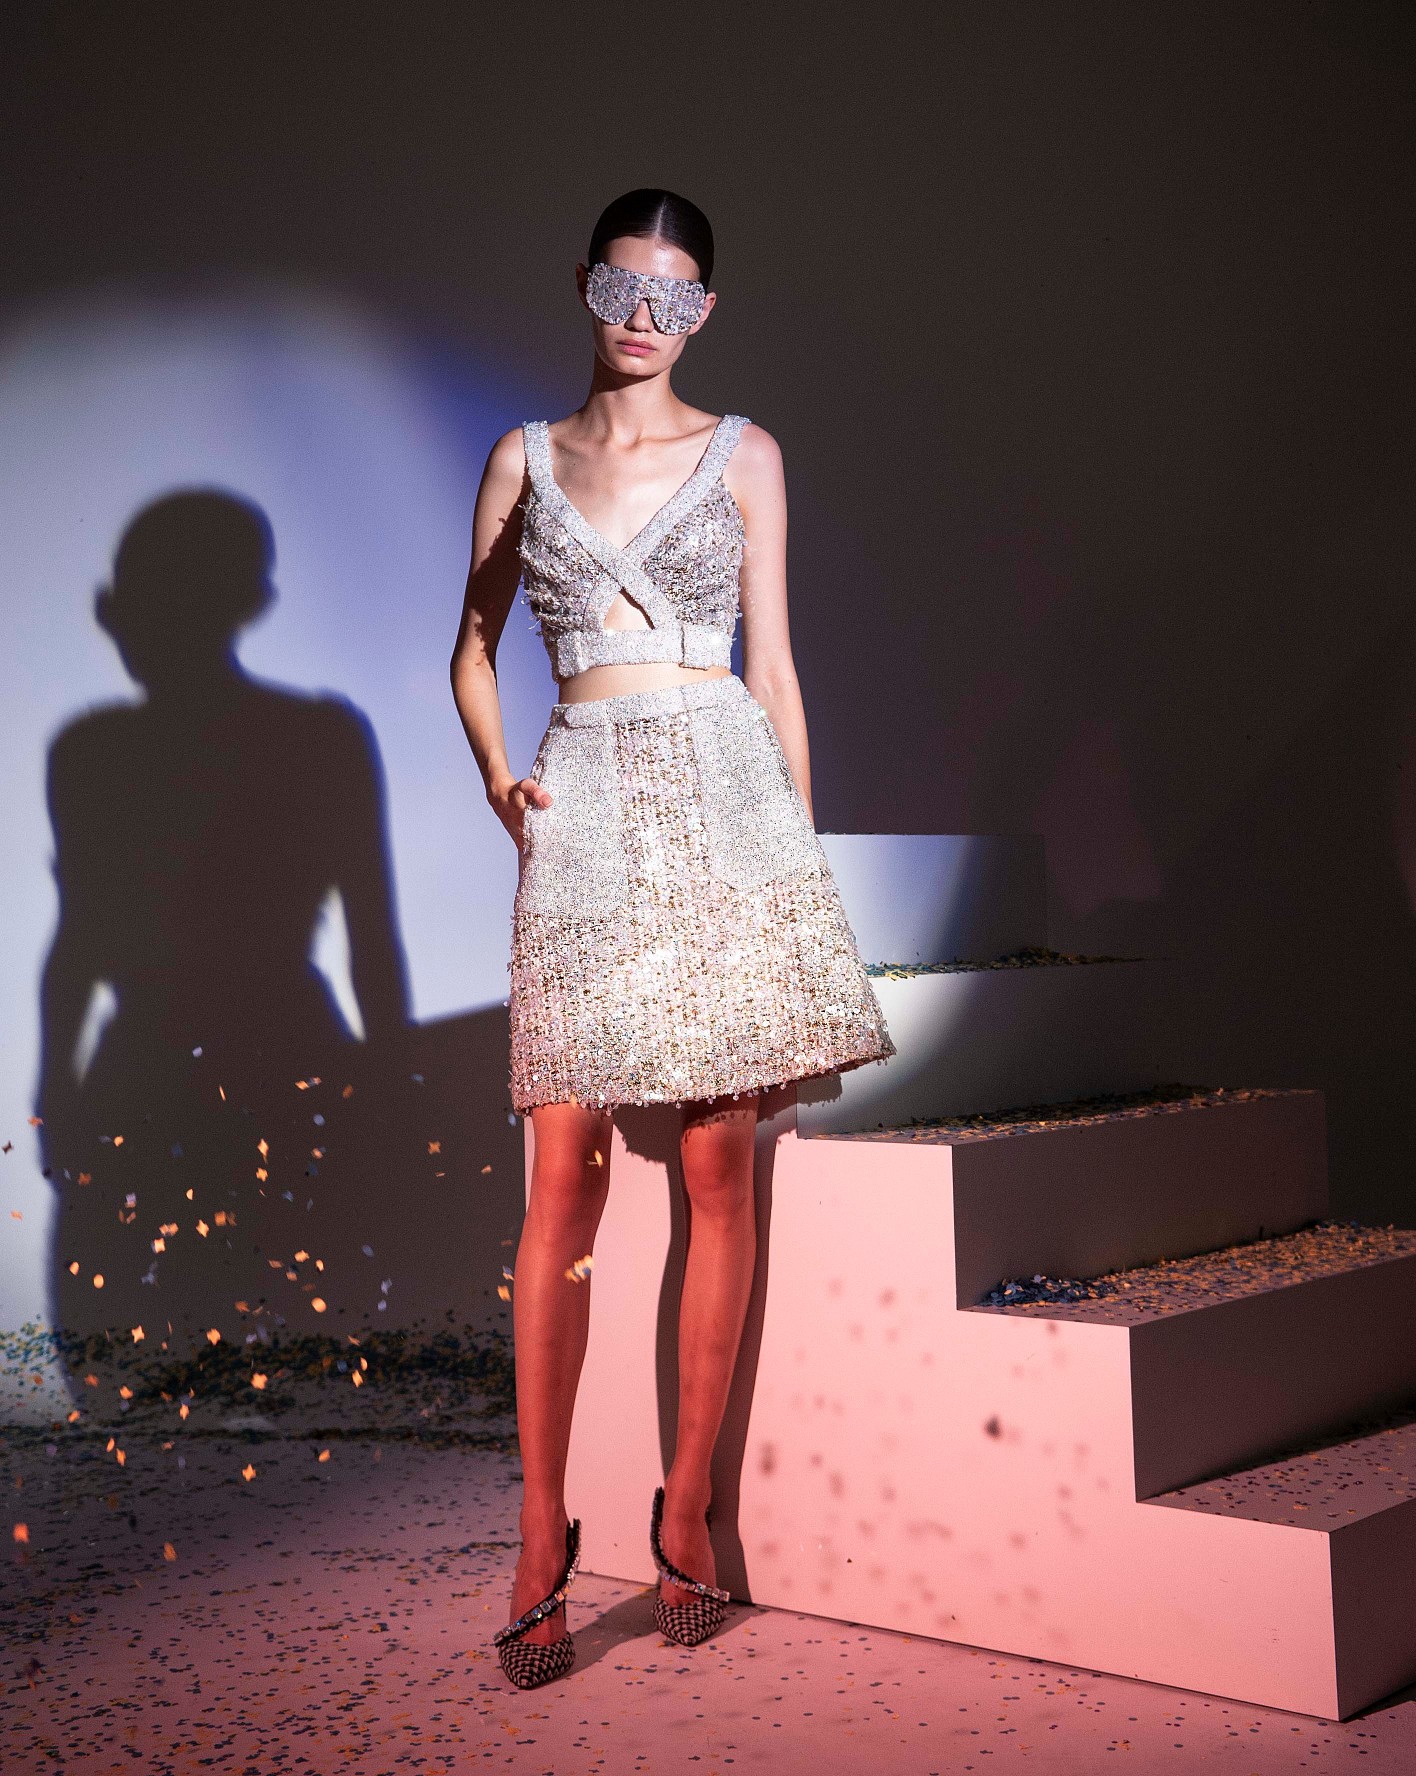 FW19-3 Iridescent Sequins Tweed Short Dress With Highlighted Swarovski Pockets And Neckline And Tweed Sunglasses .jpg